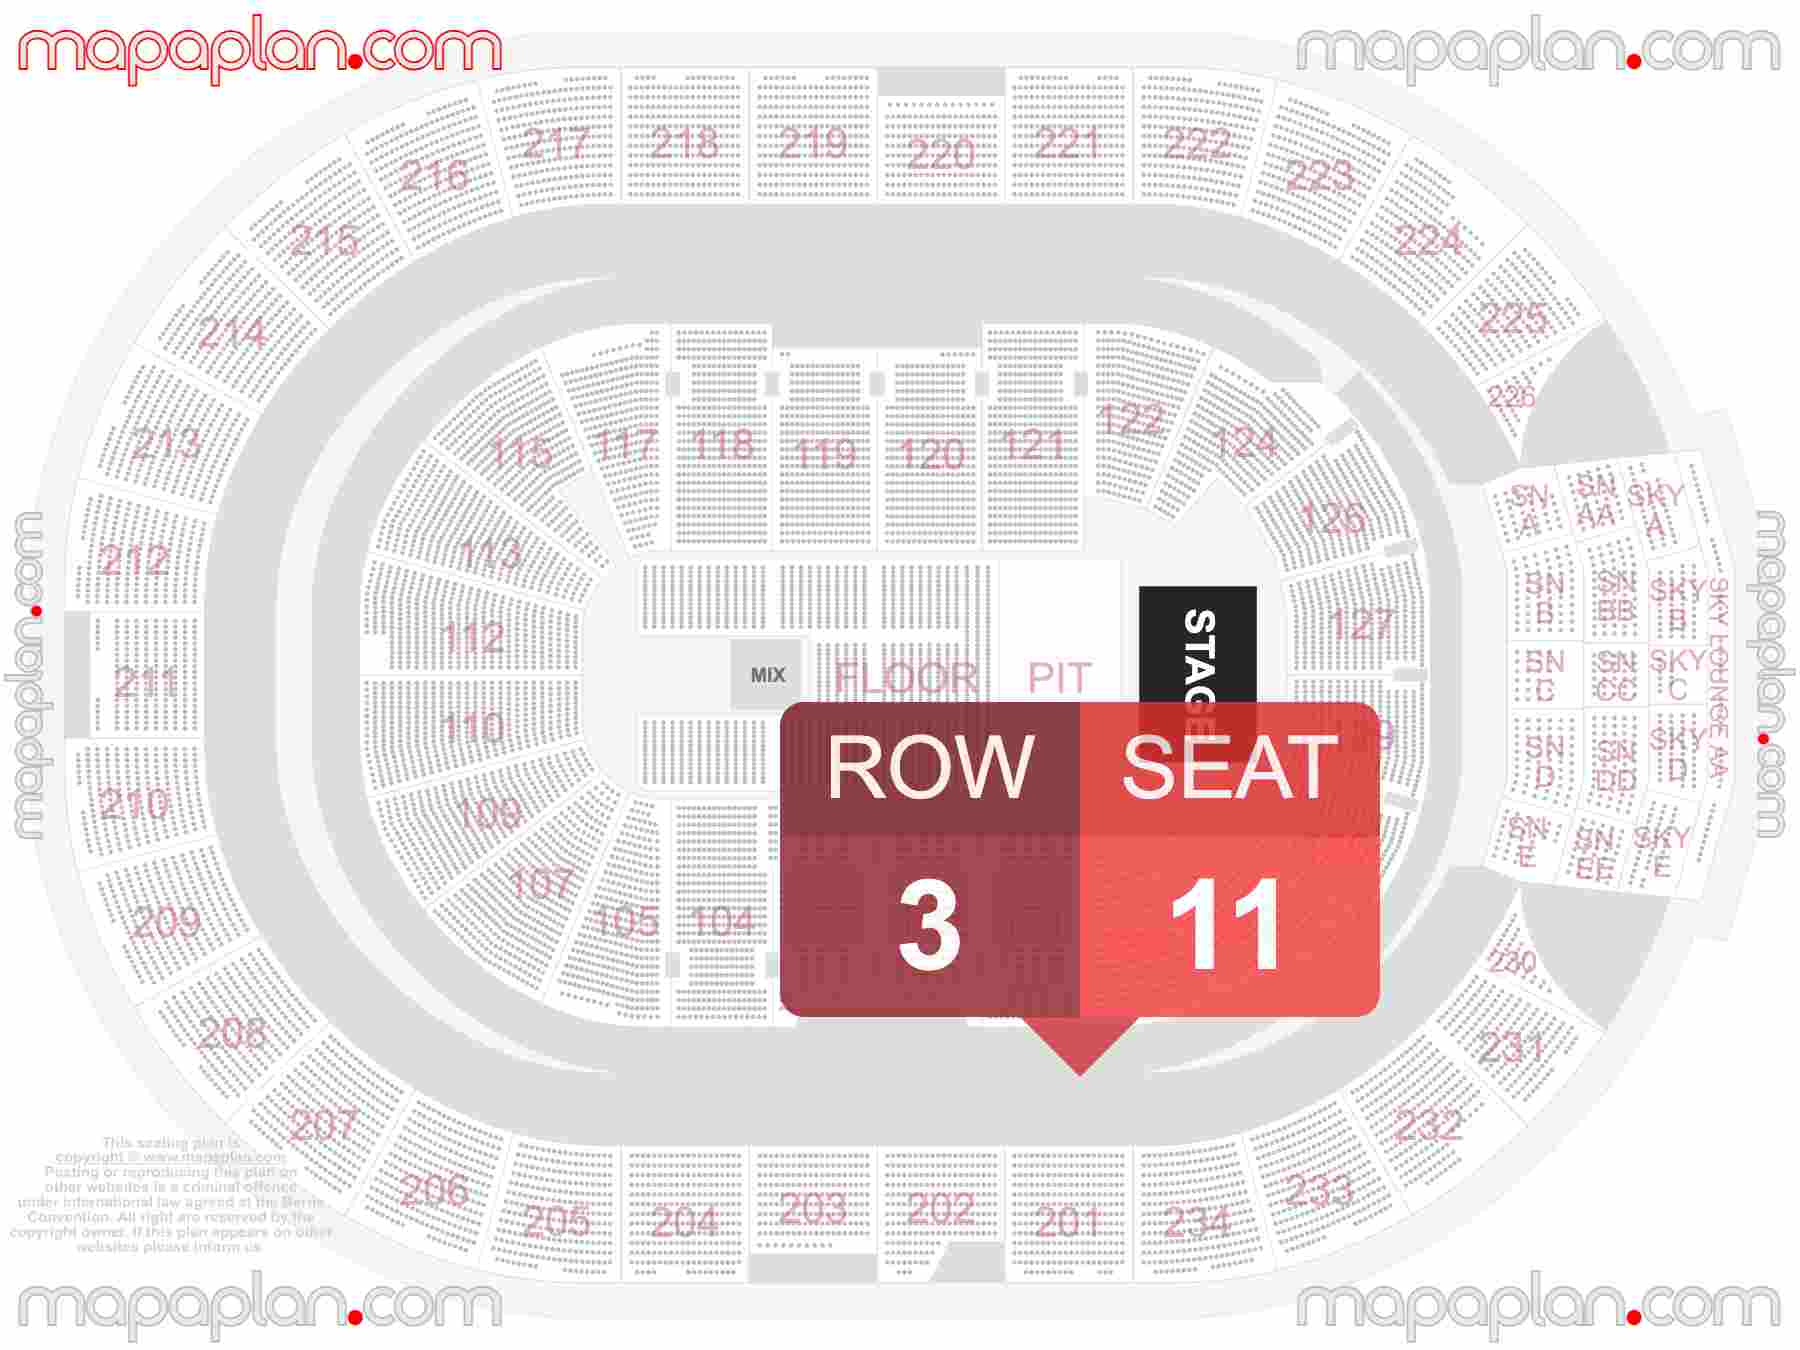 Edmonton Rogers Place seating map Concert with PIT floor standing interactive seating checker map chart showing seat numbers per row - Ticket prices sections review diagram